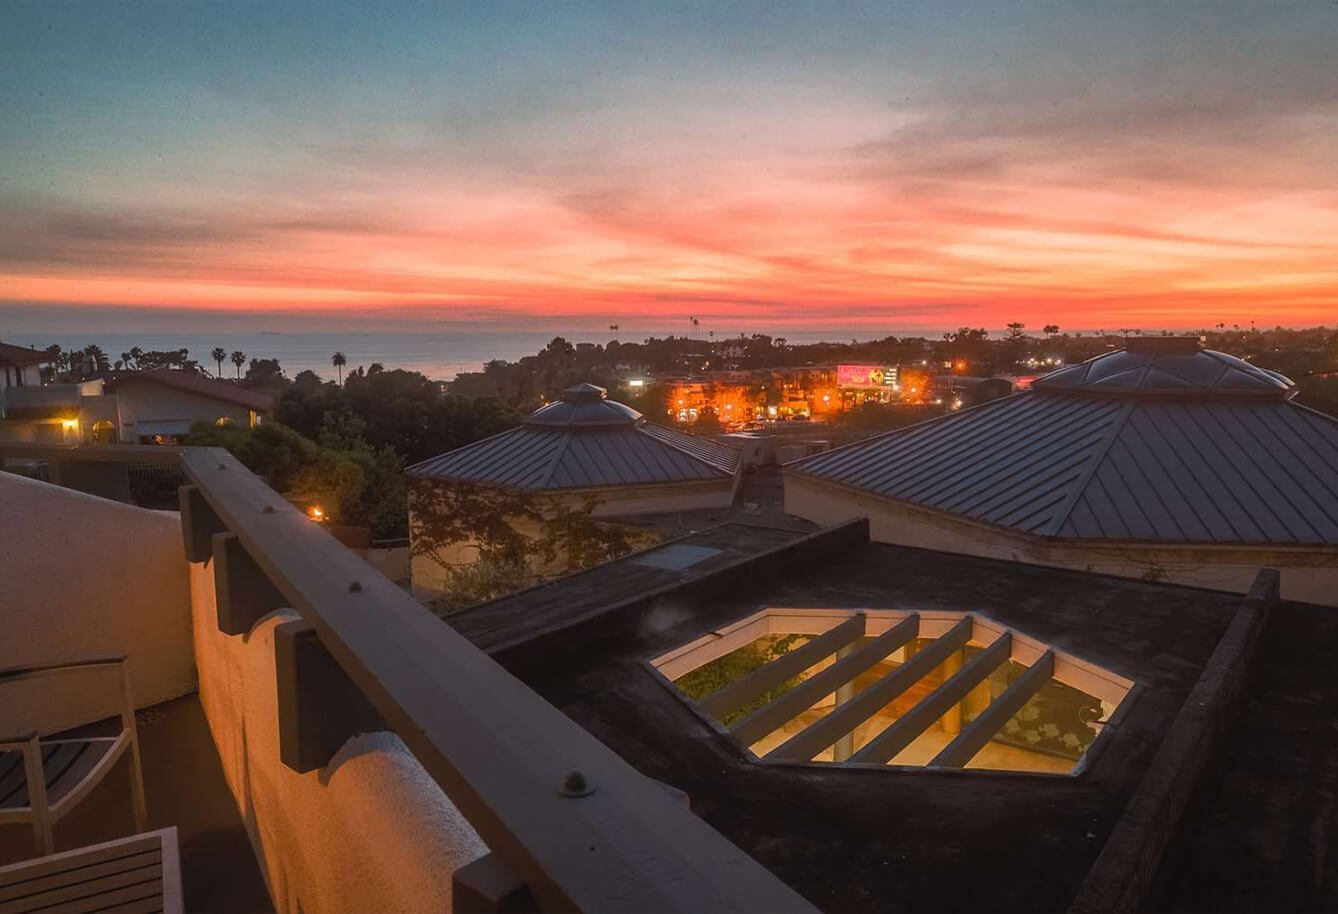 Balcony view of a sunset over the ocean